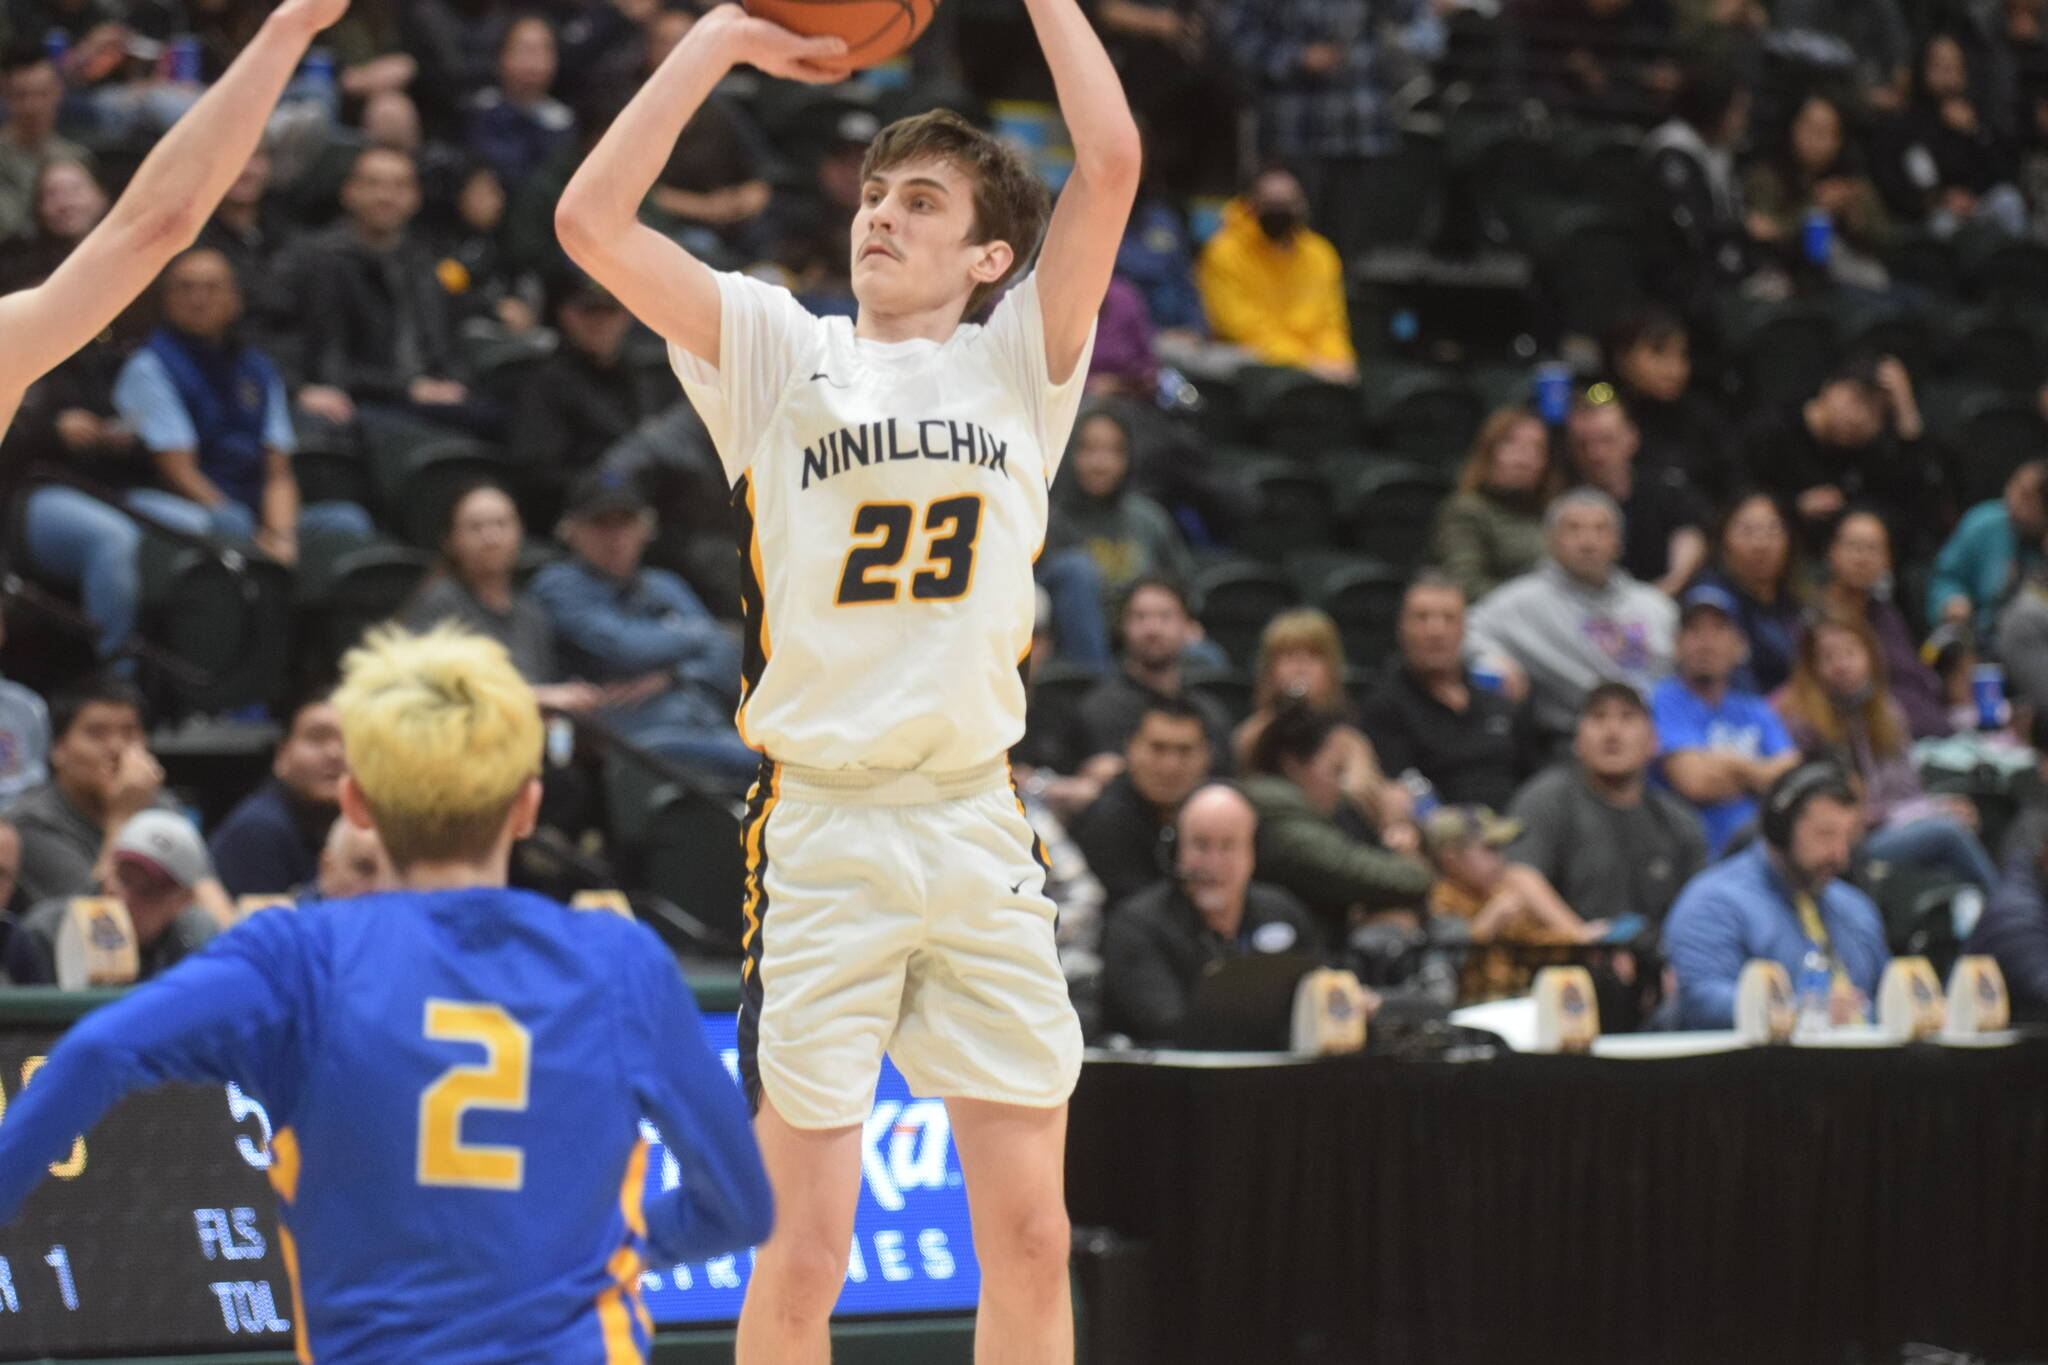 Iukah Kalugin takes a shot against Metlakatla during the 2A state basketball championship game at the Alaska Airlines Center in Anchorage, Alaska on Saturday, March 19, 2022. (Camille Botello/Peninsula Clarion)